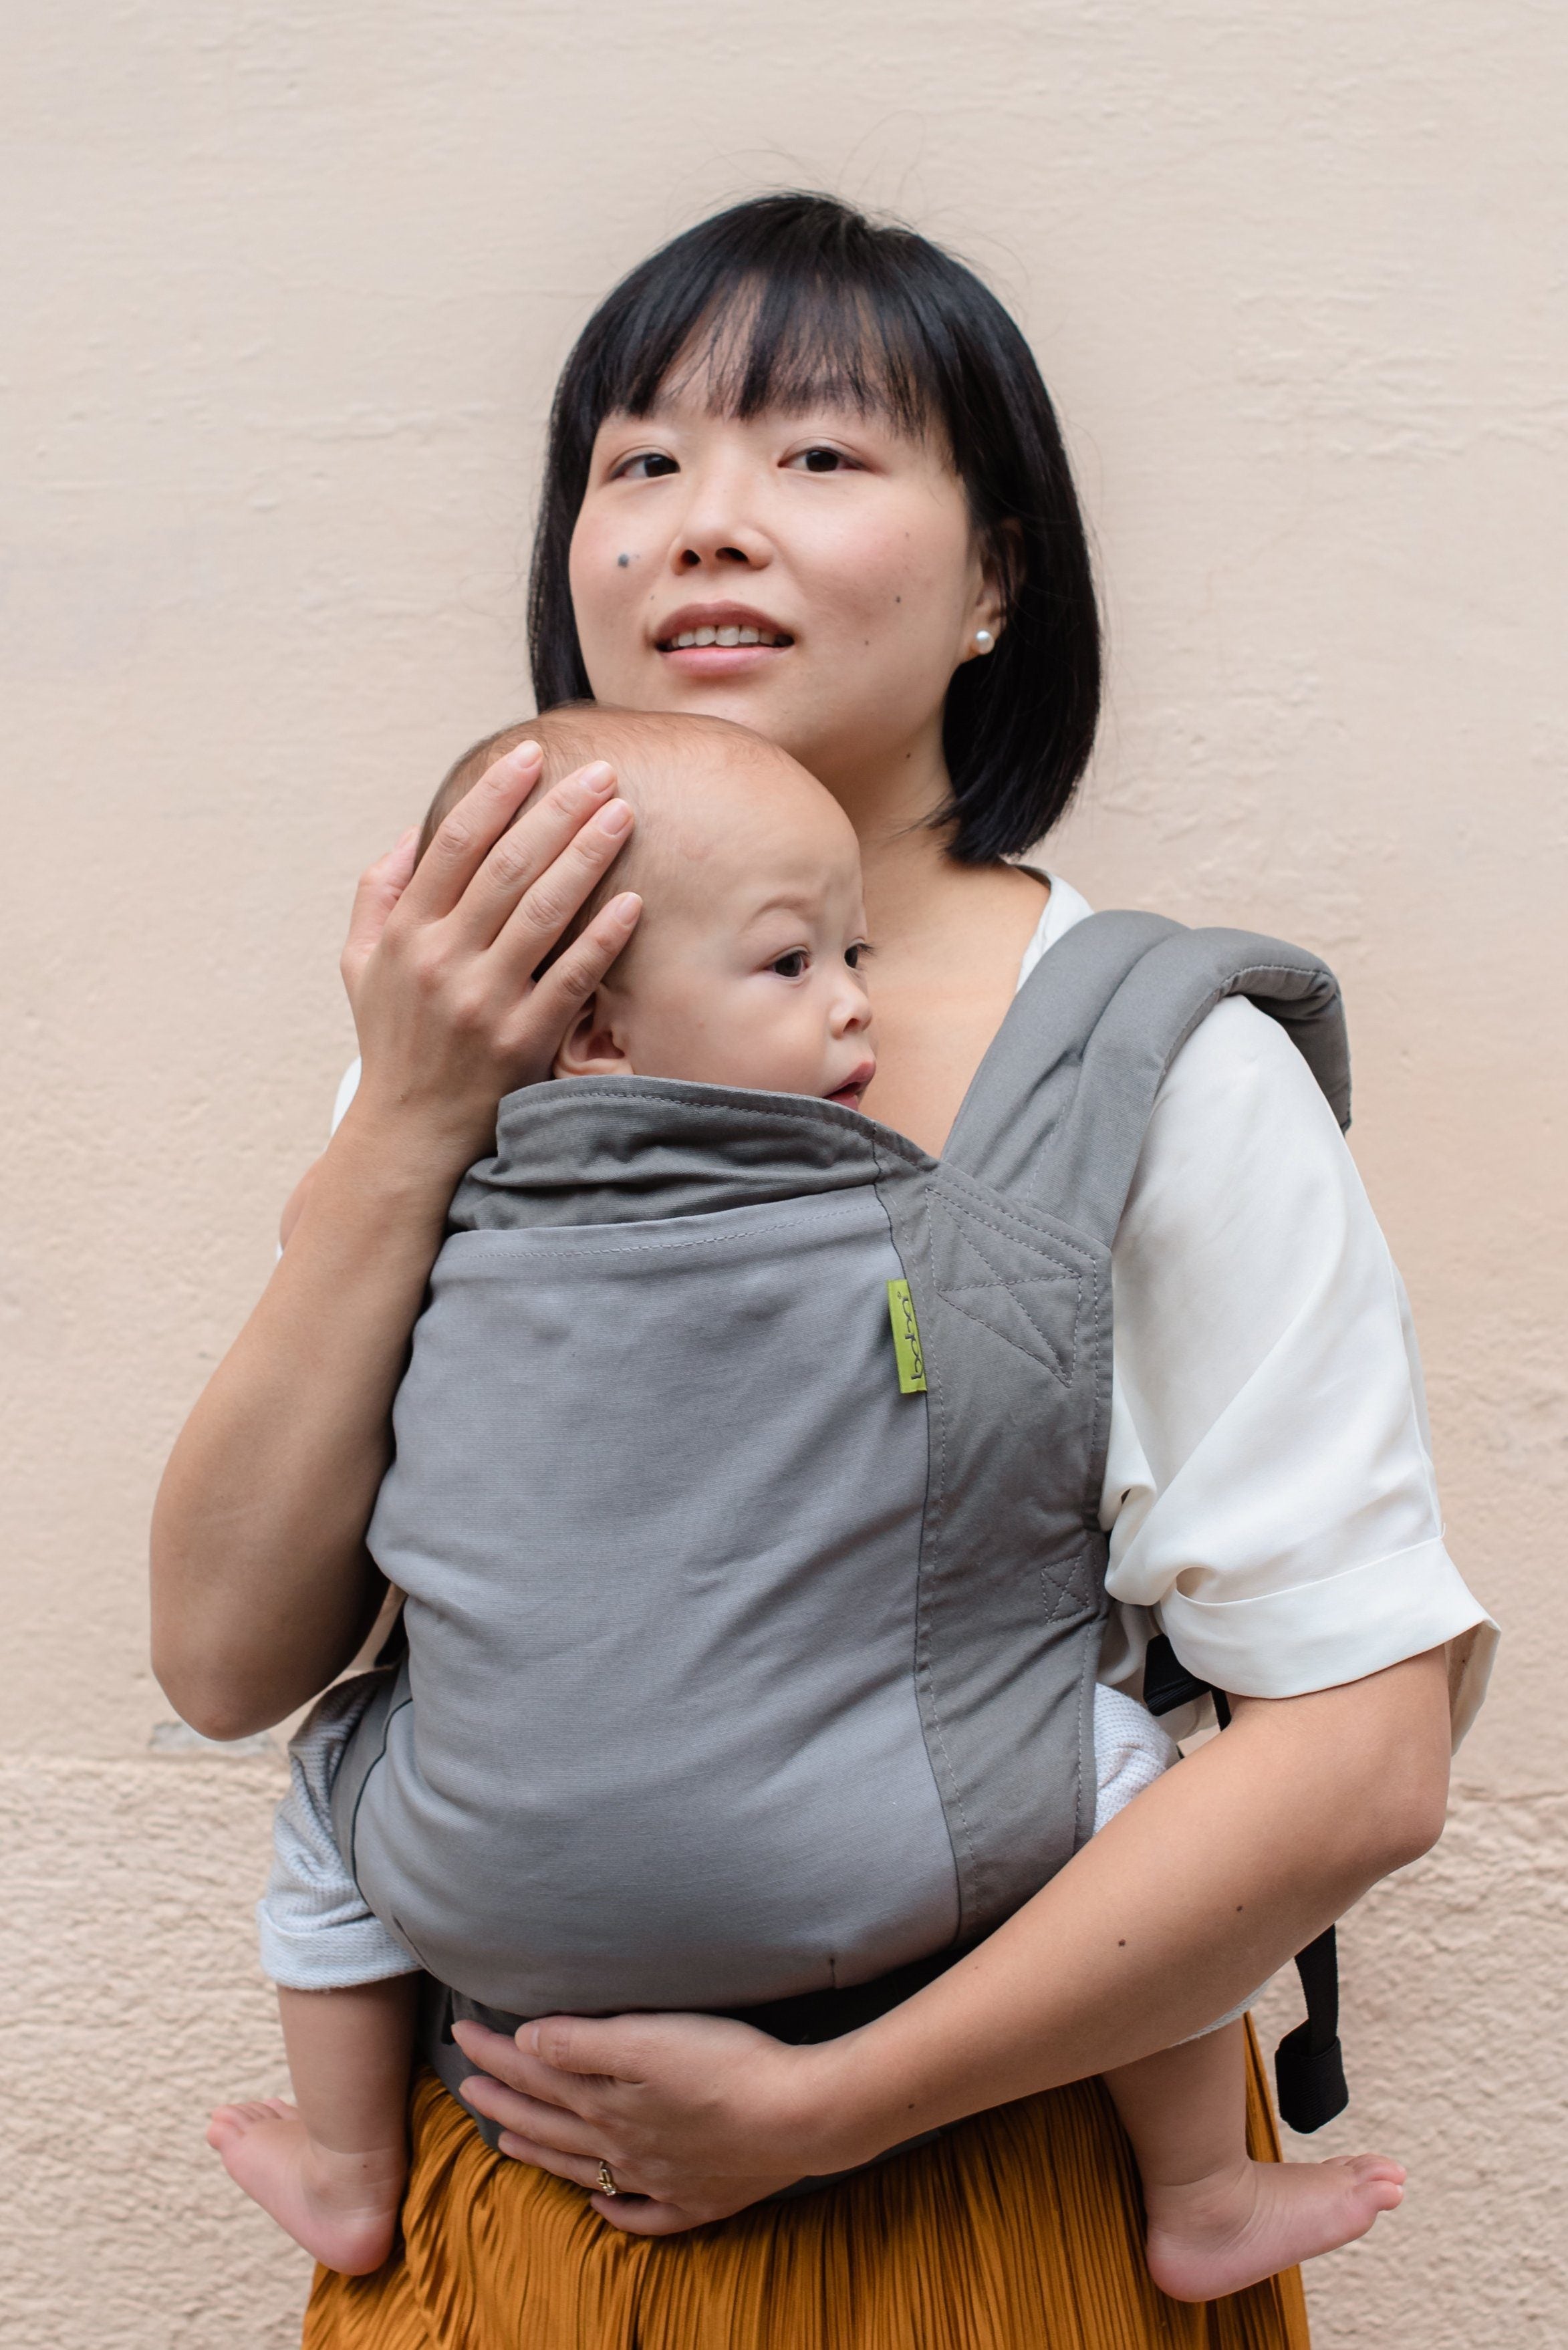 Boba classic baby carrier Dusk. Our streamlined soft structured baby carrier is designed to go and grow with your little one. This ergonomic front facing baby carrier is ready to use from infant to toddler.